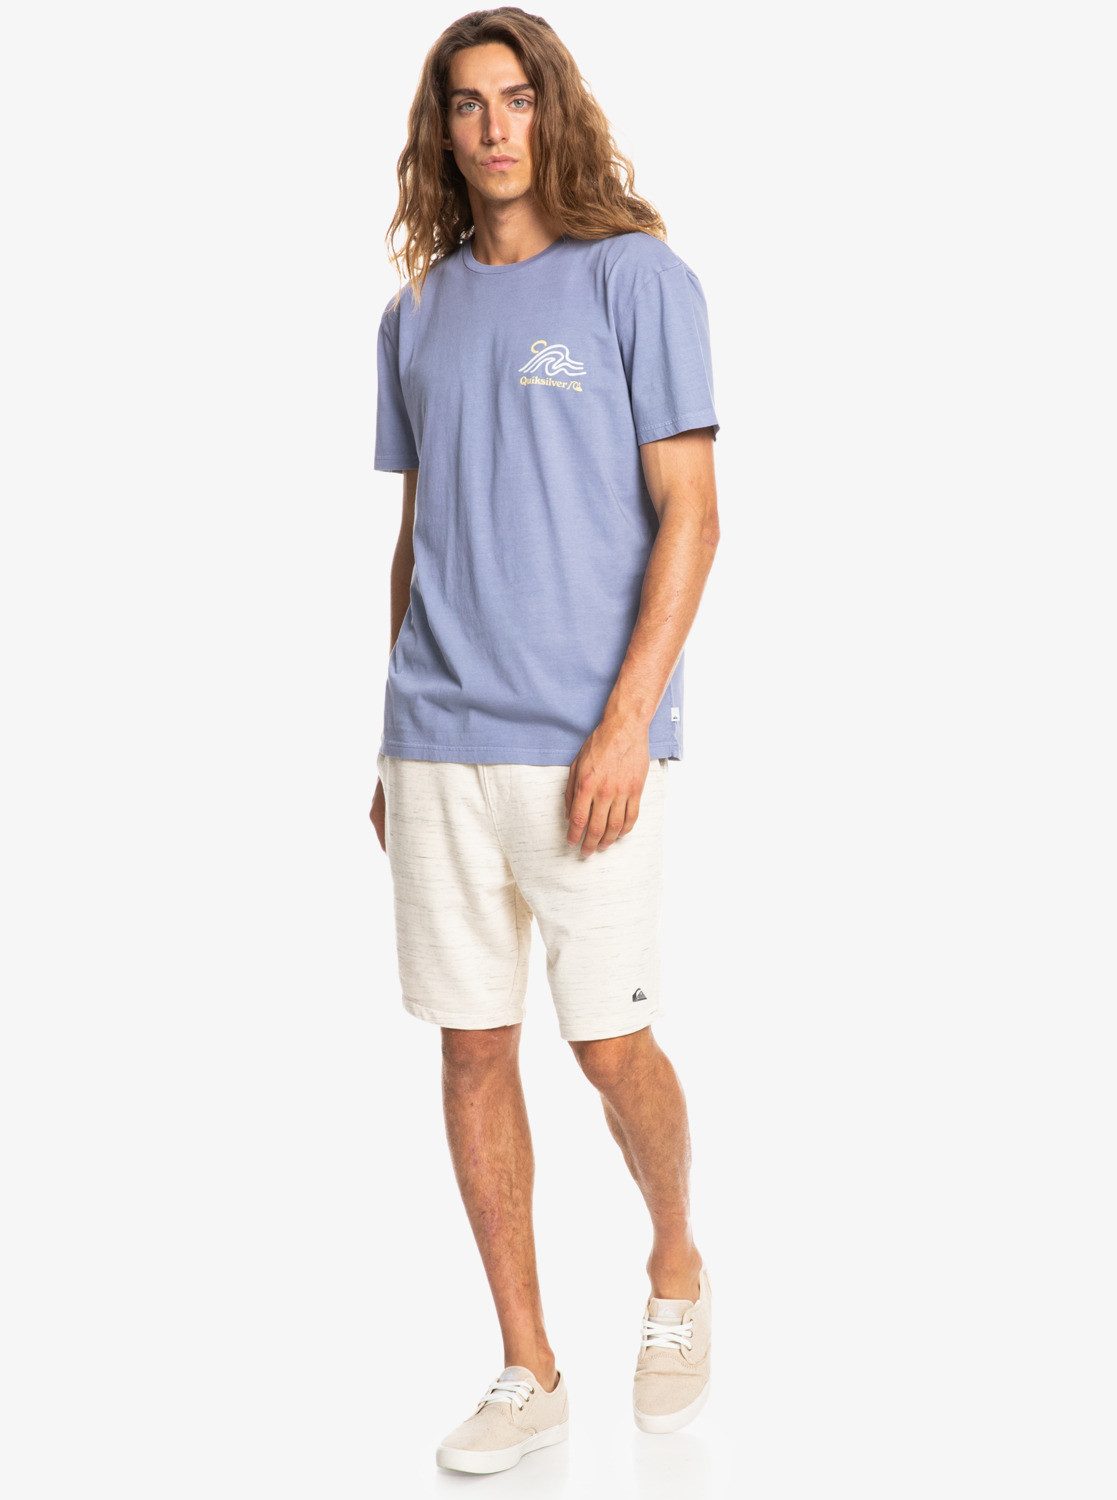 T-Shirt Quiksilver Slow Mover